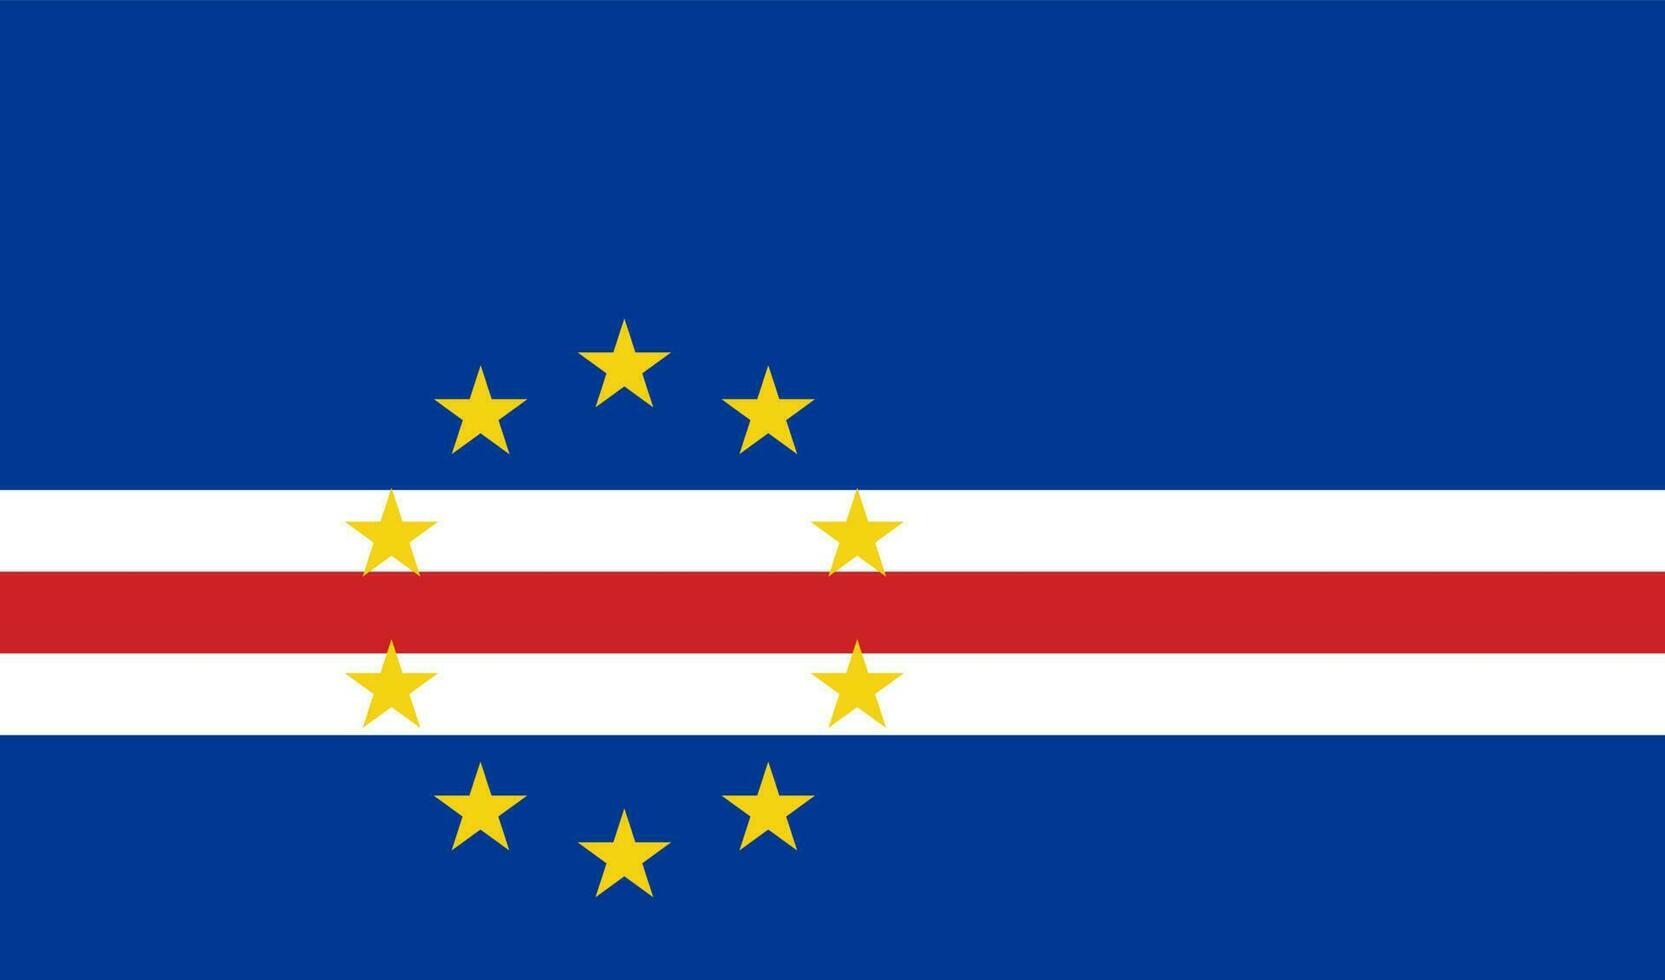 Cape Verde flag, official colors and proportion. Vector illustration.